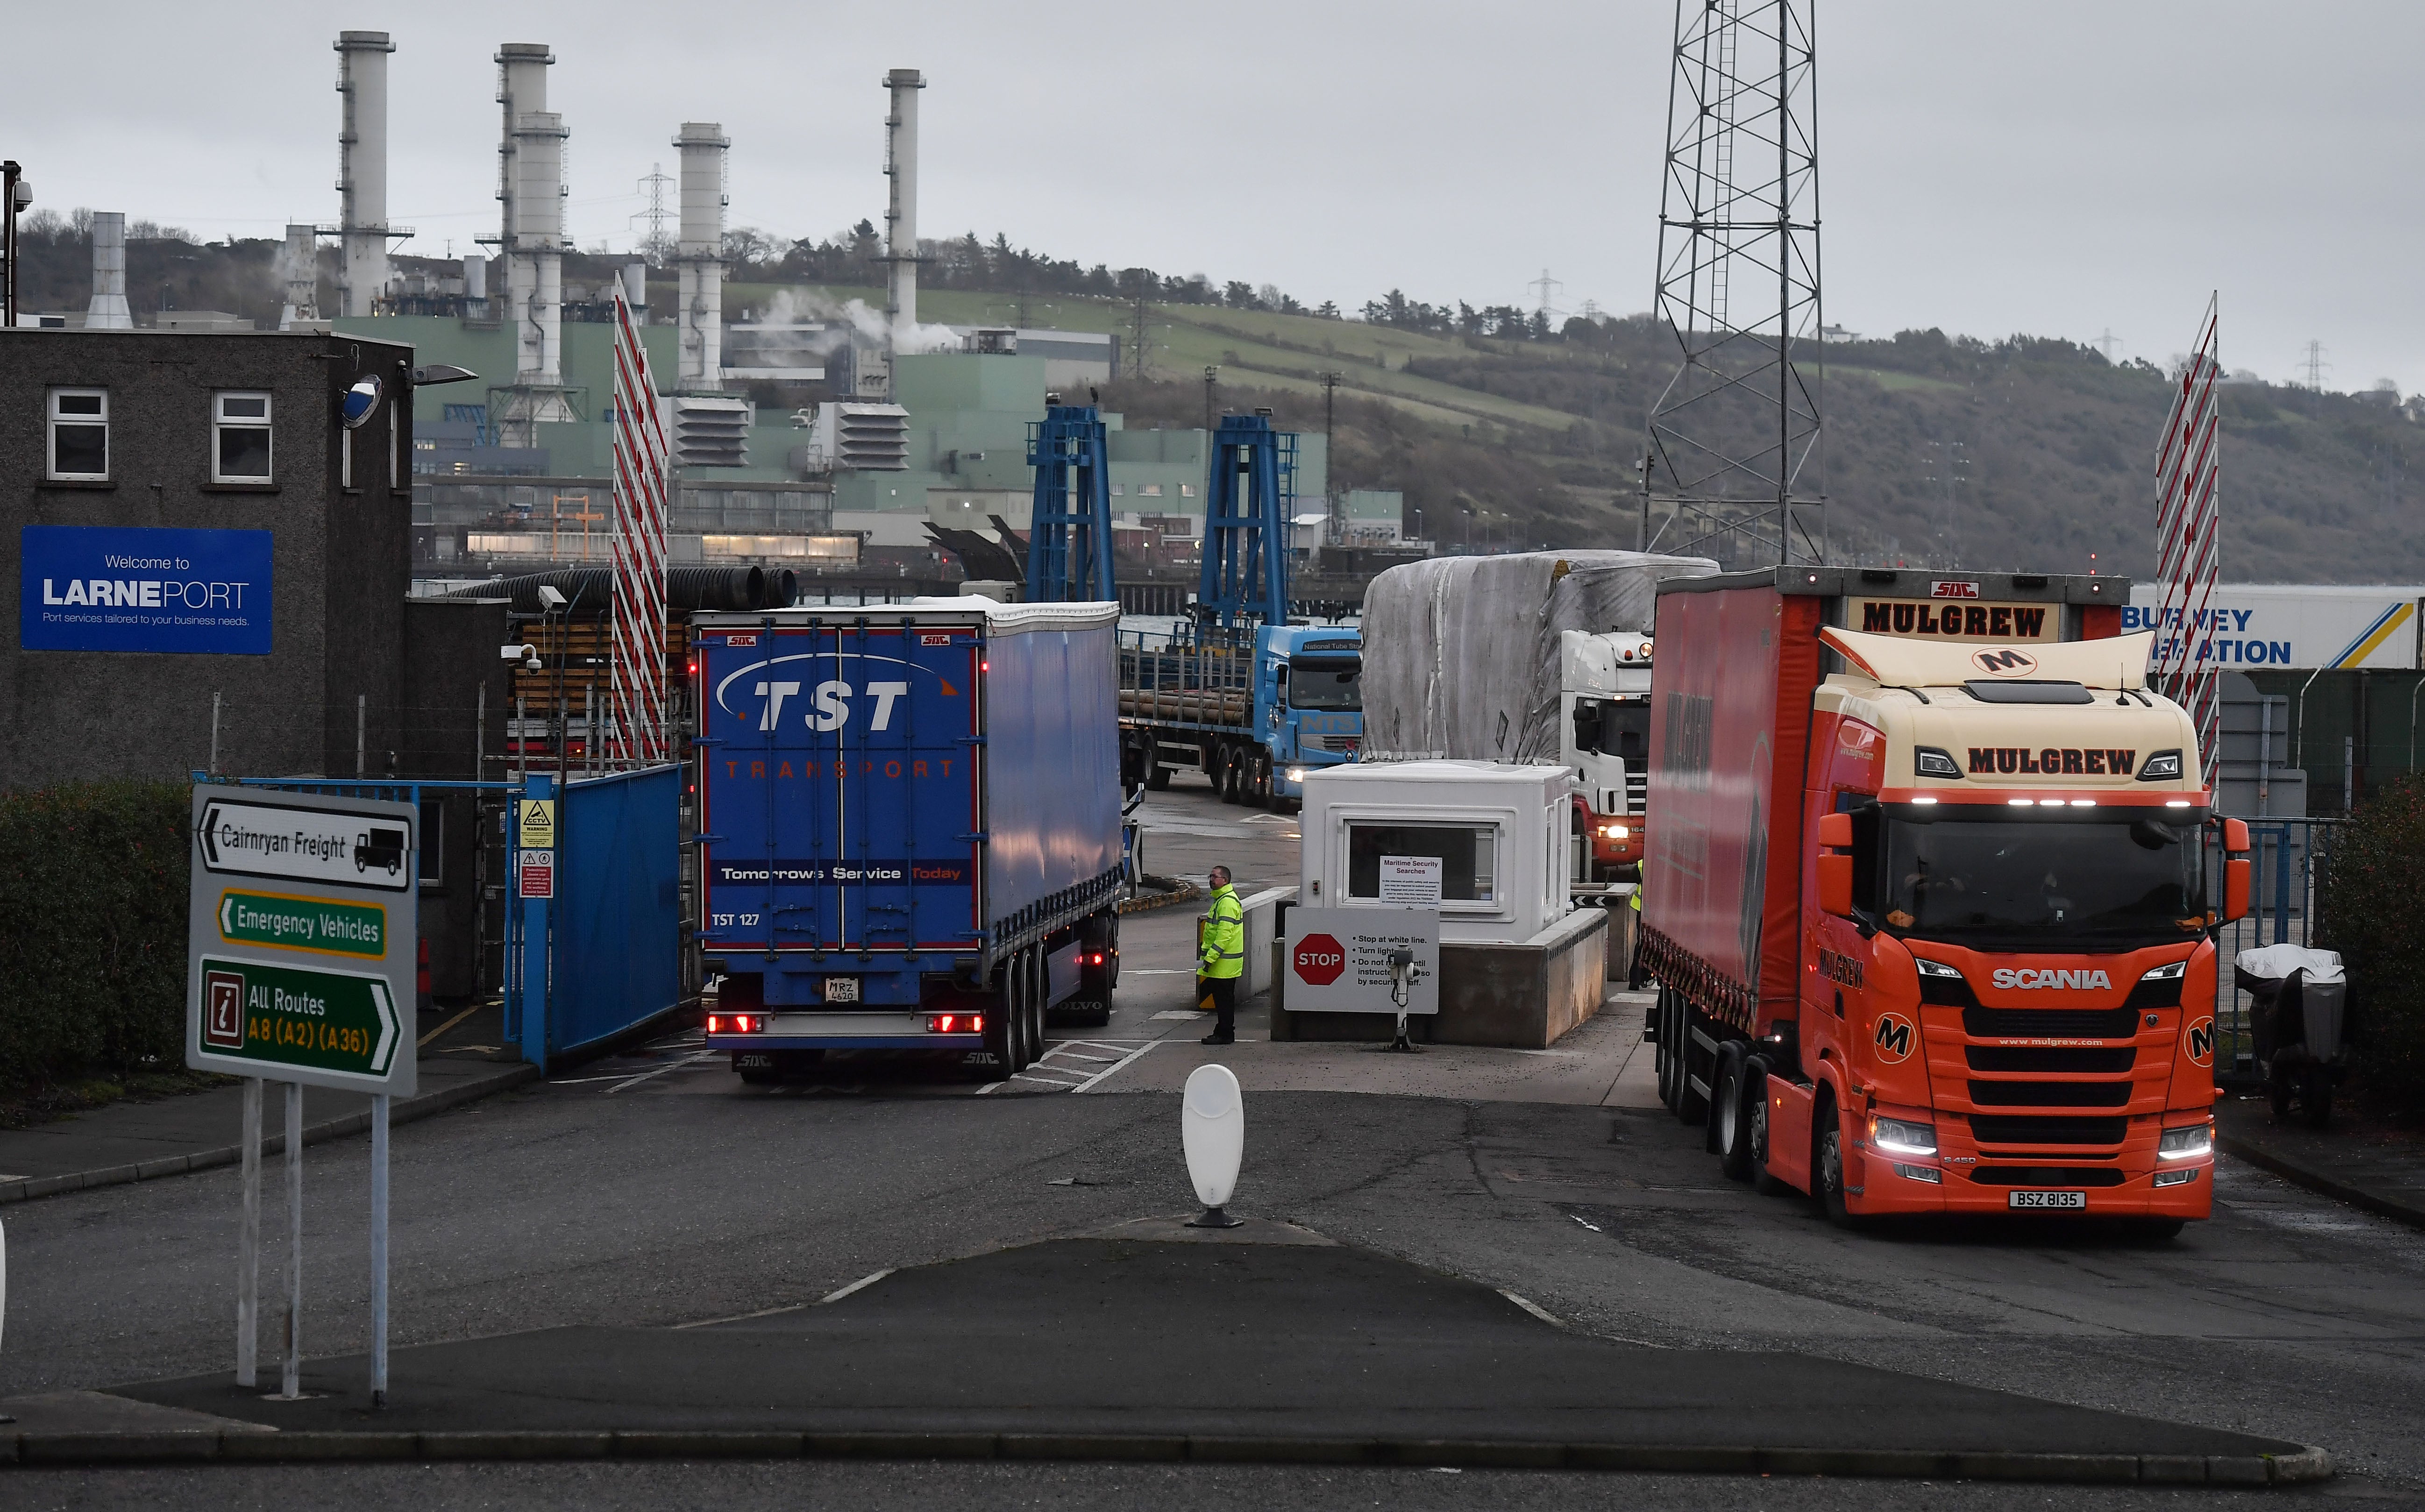 LARNE, NORTHERN IRELAND Port officers inspect vehicles at a checkpoint in Larne